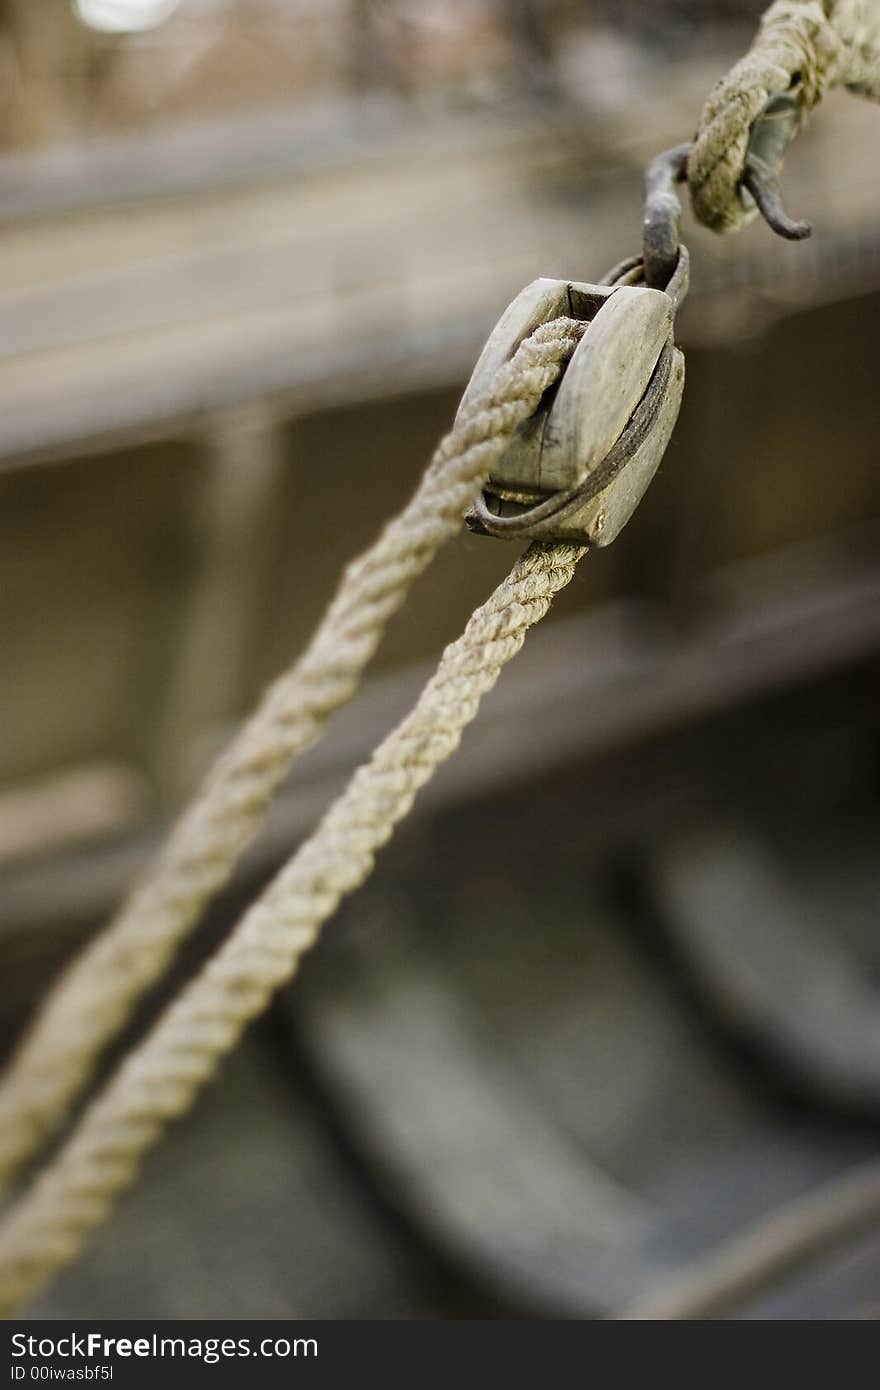 An old ship pulley system with inner hull of boat in background